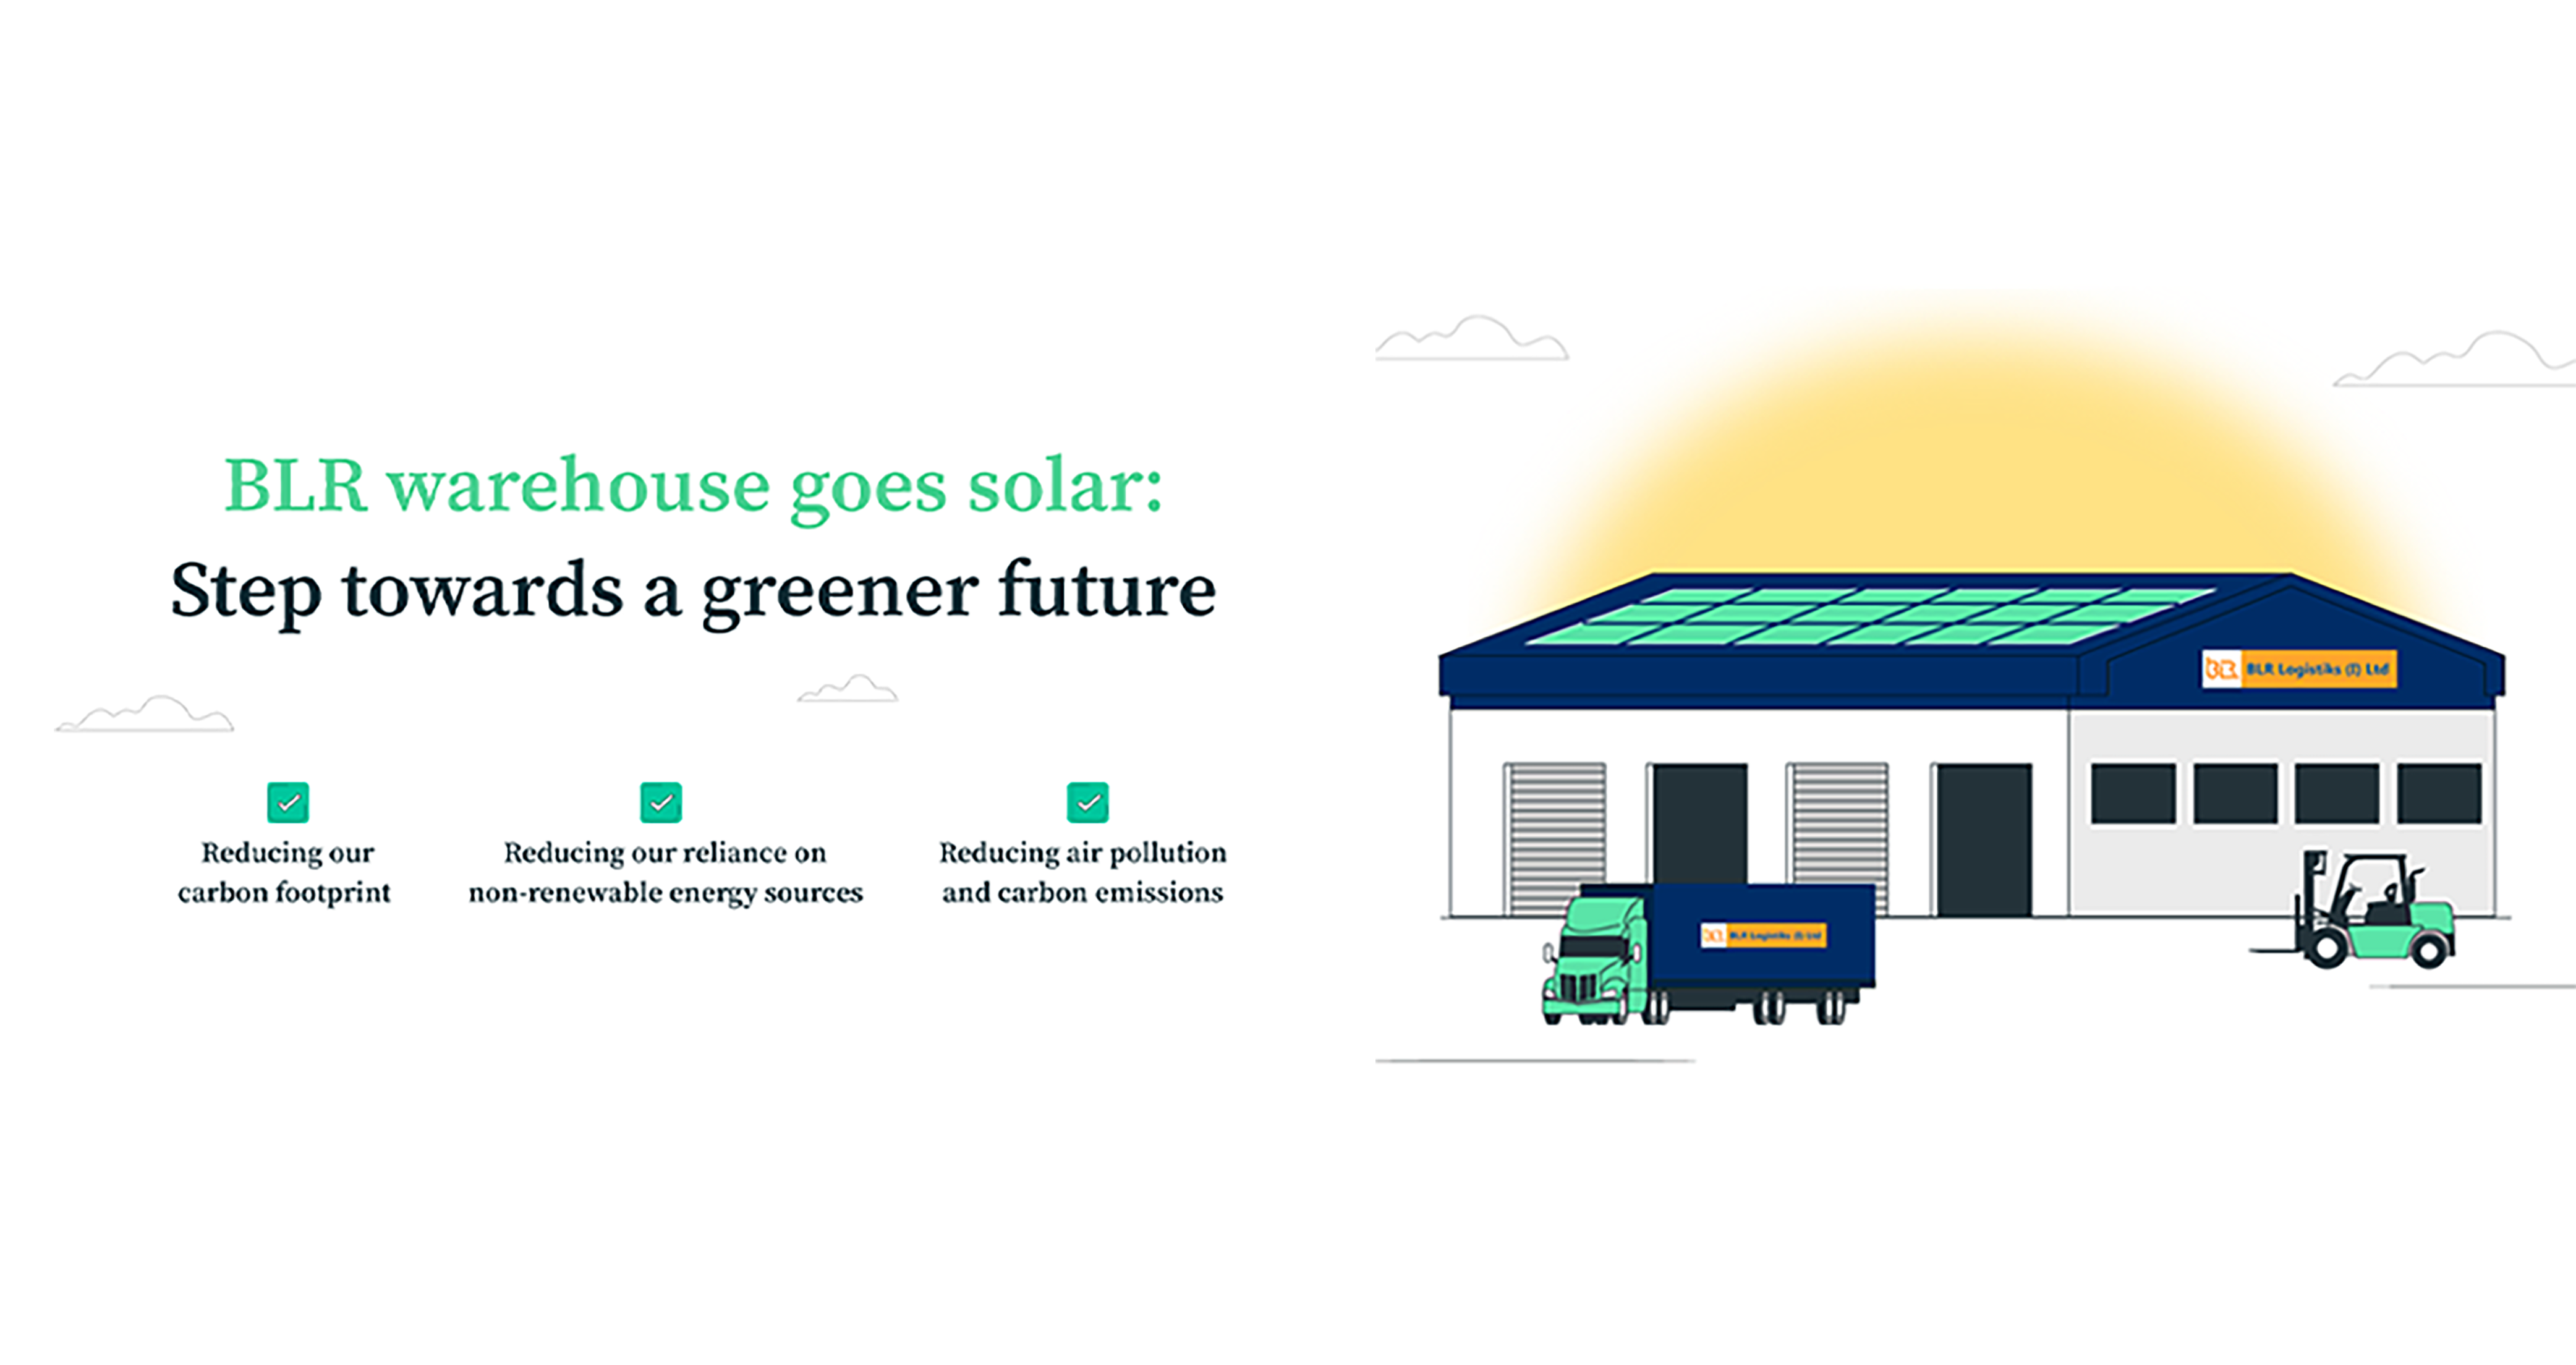 BLR Logistiks goes solar with their warehouses leading the way towards decarbonization and a sustainable future